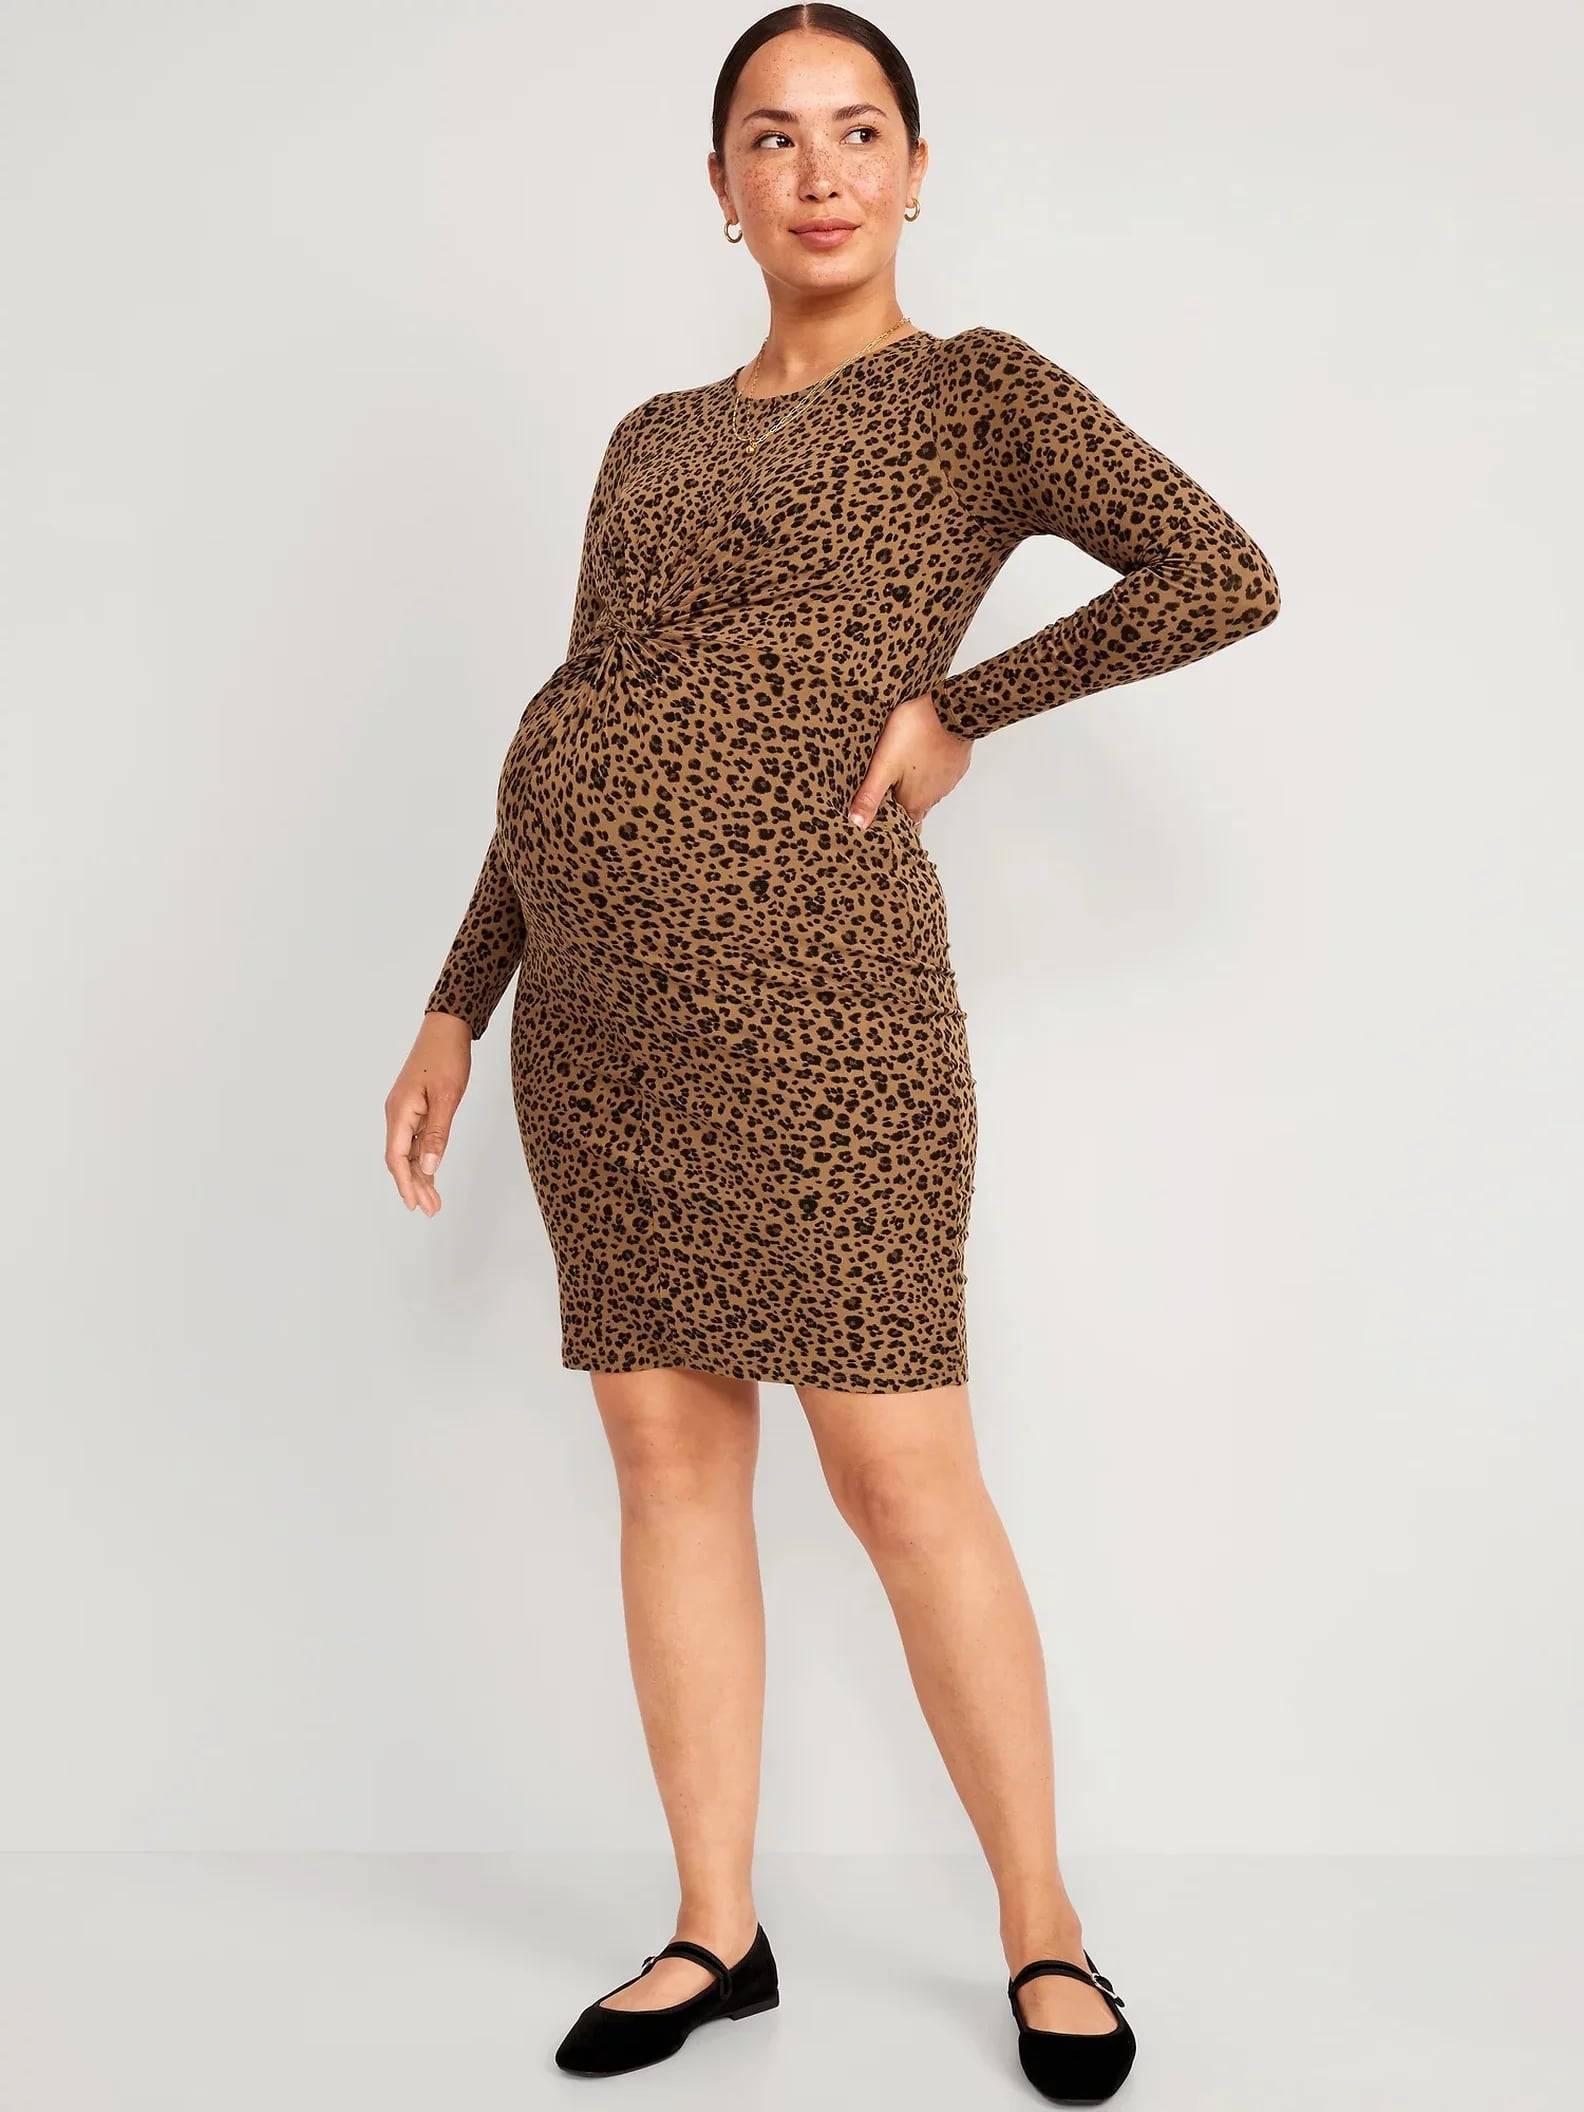 Maternity Workwear: 9 Must-Haves For Every Pregnant Woman